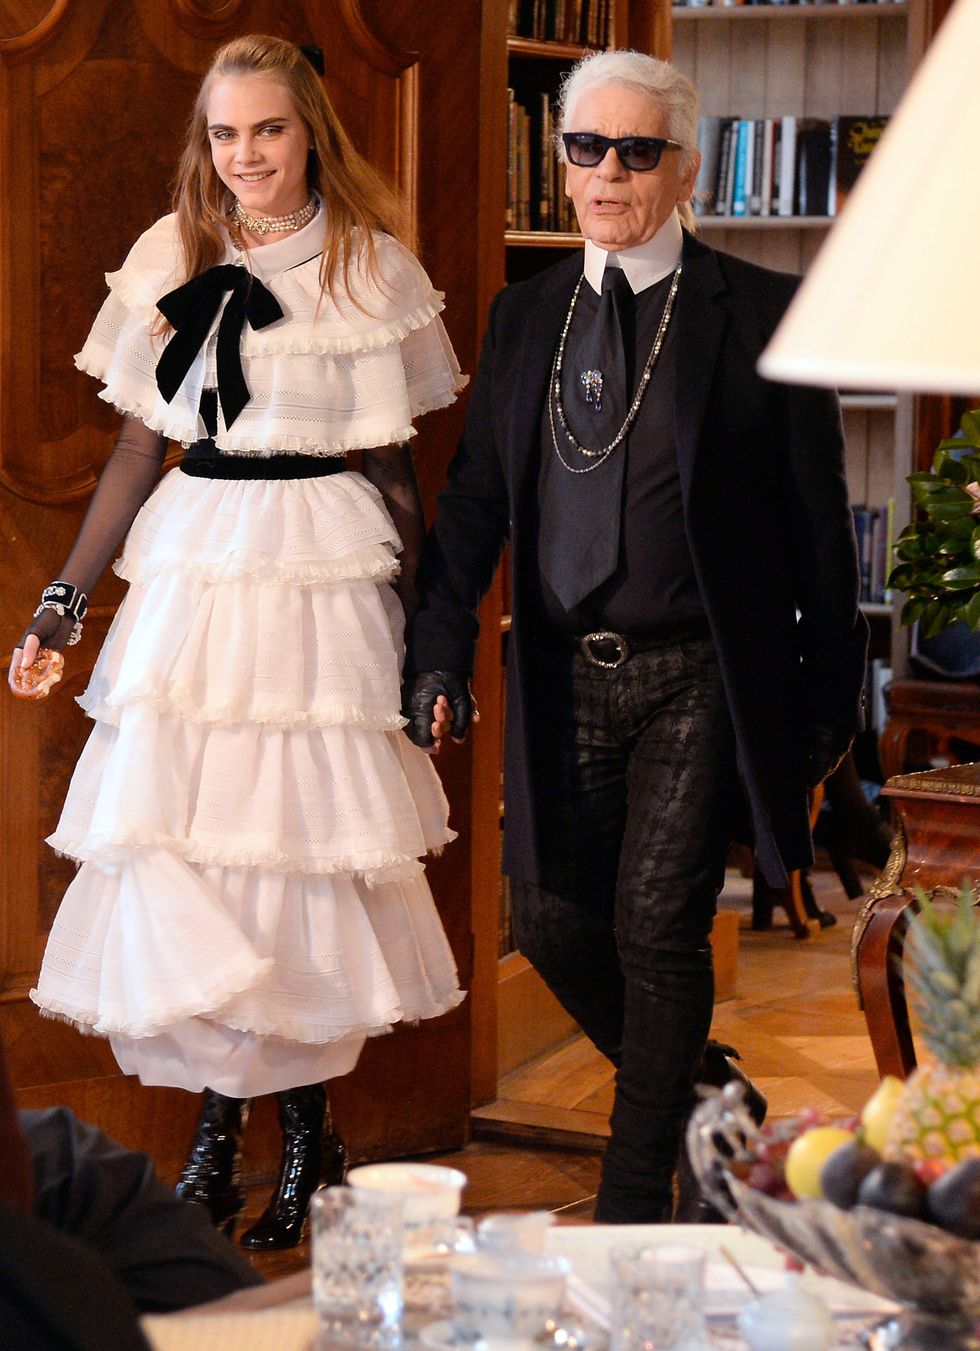 Cara Delevingne and Karl Lagerfeld at the Chanel Metiers d'Art Paris fashion show